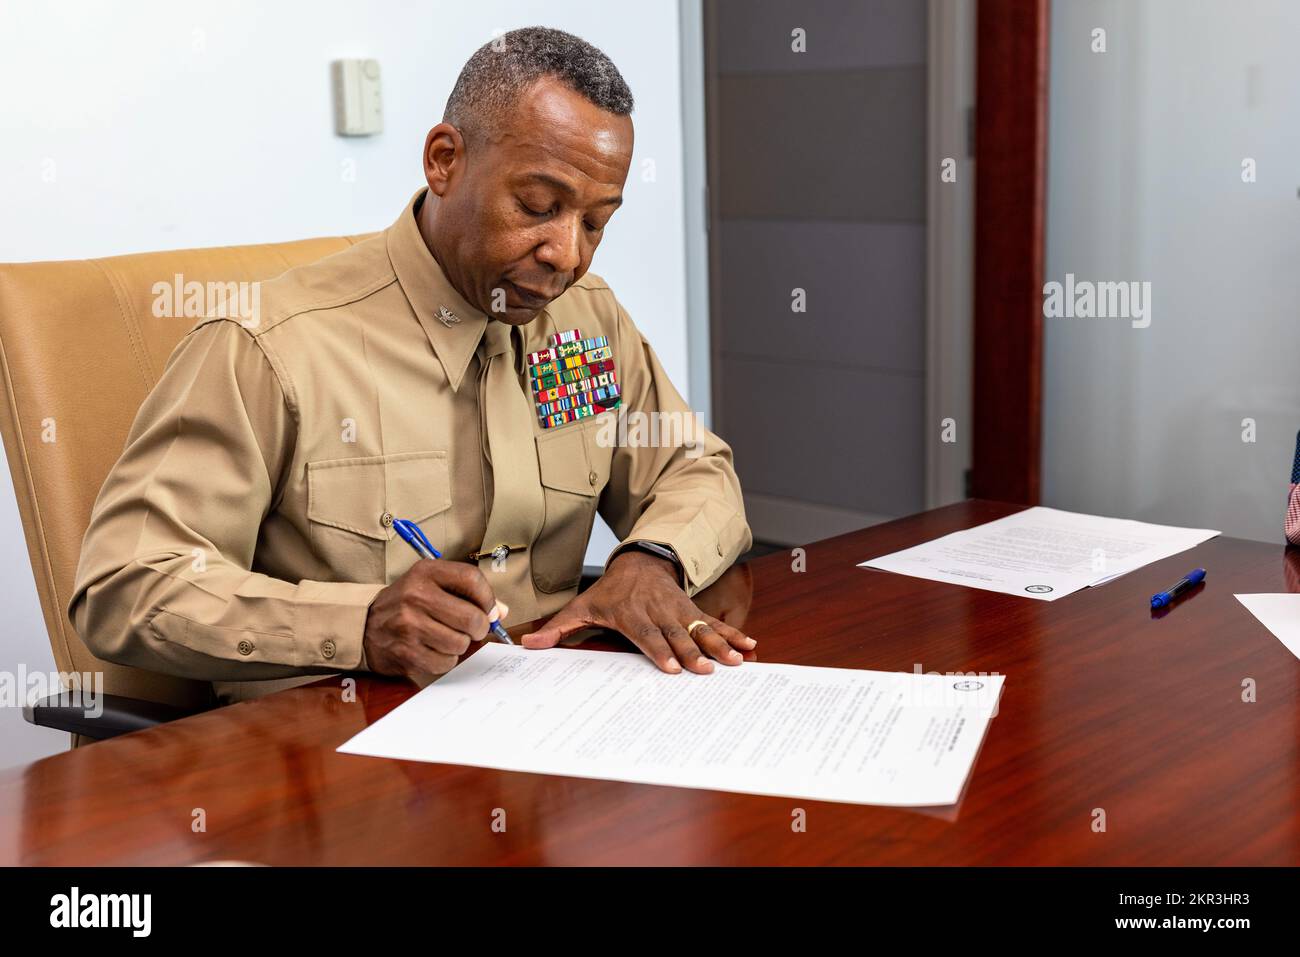 U.S. Marine Corps Col. Michael L. Brooks, base commander of Marine Corps Base Quantico, signs the amendment to the Intergovernmental Support Agreement between Marine Corps Base Quantico and the Board of County Supervisors of Prince William County at the Potomac District Office in Dumfries, Virginia on Nov. 7, 2022. The amendment will increase MCBQ’s spending limits which will allow MCBQ to continue to build on the already successful partnership with Prince William County and ensure MCBQ is able to maintain effective operations and maintenance of the installation. Stock Photo